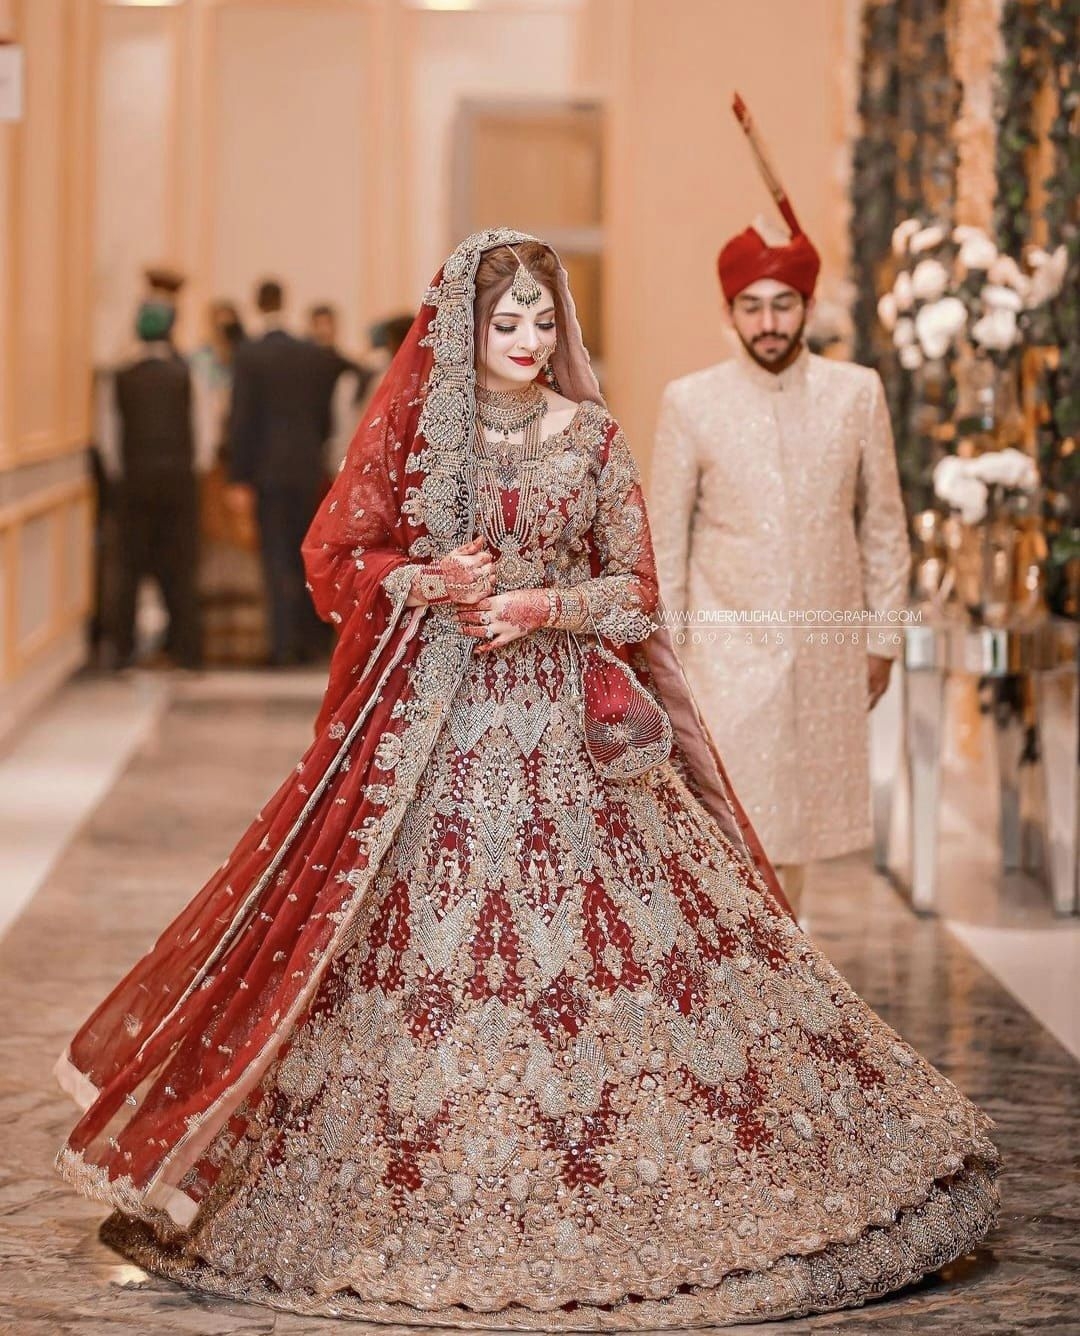 Royal Embroidered Pakistani Bridal Dress in Red Color